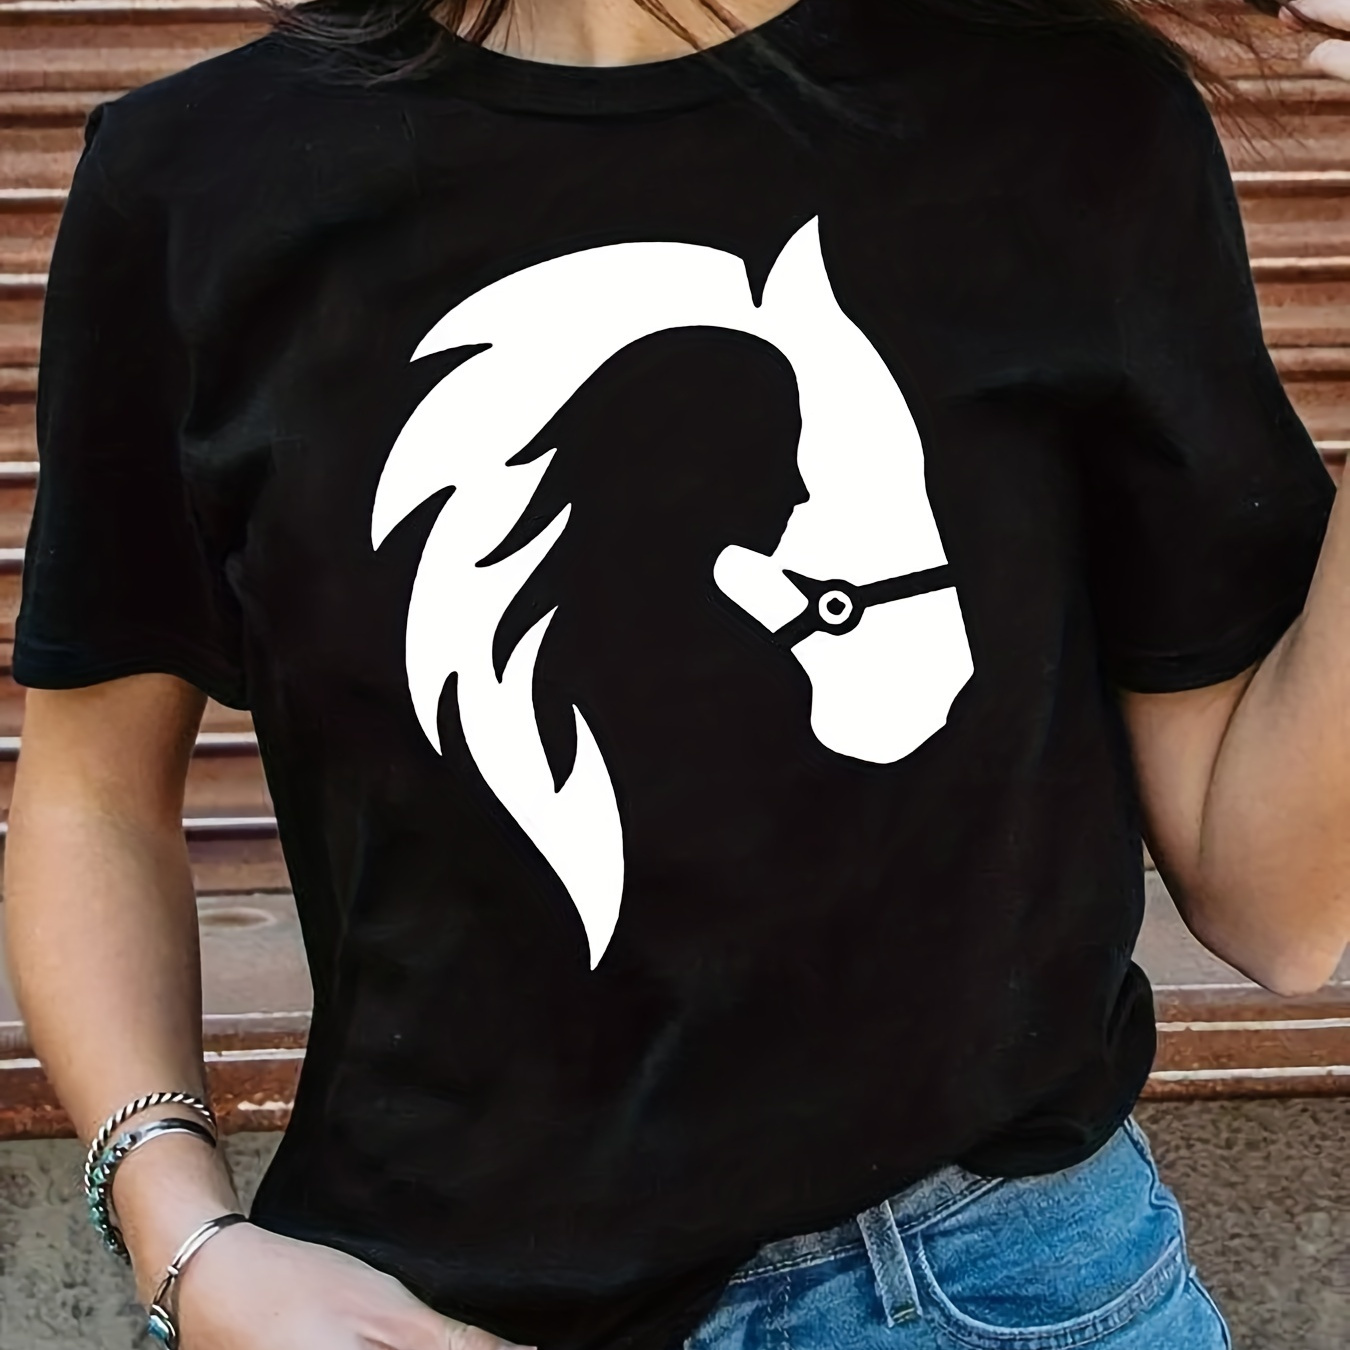 

Horse Head Print T-shirt, Short Sleeve Crew Neck Casual Top For Summer & Spring, Women's Clothing